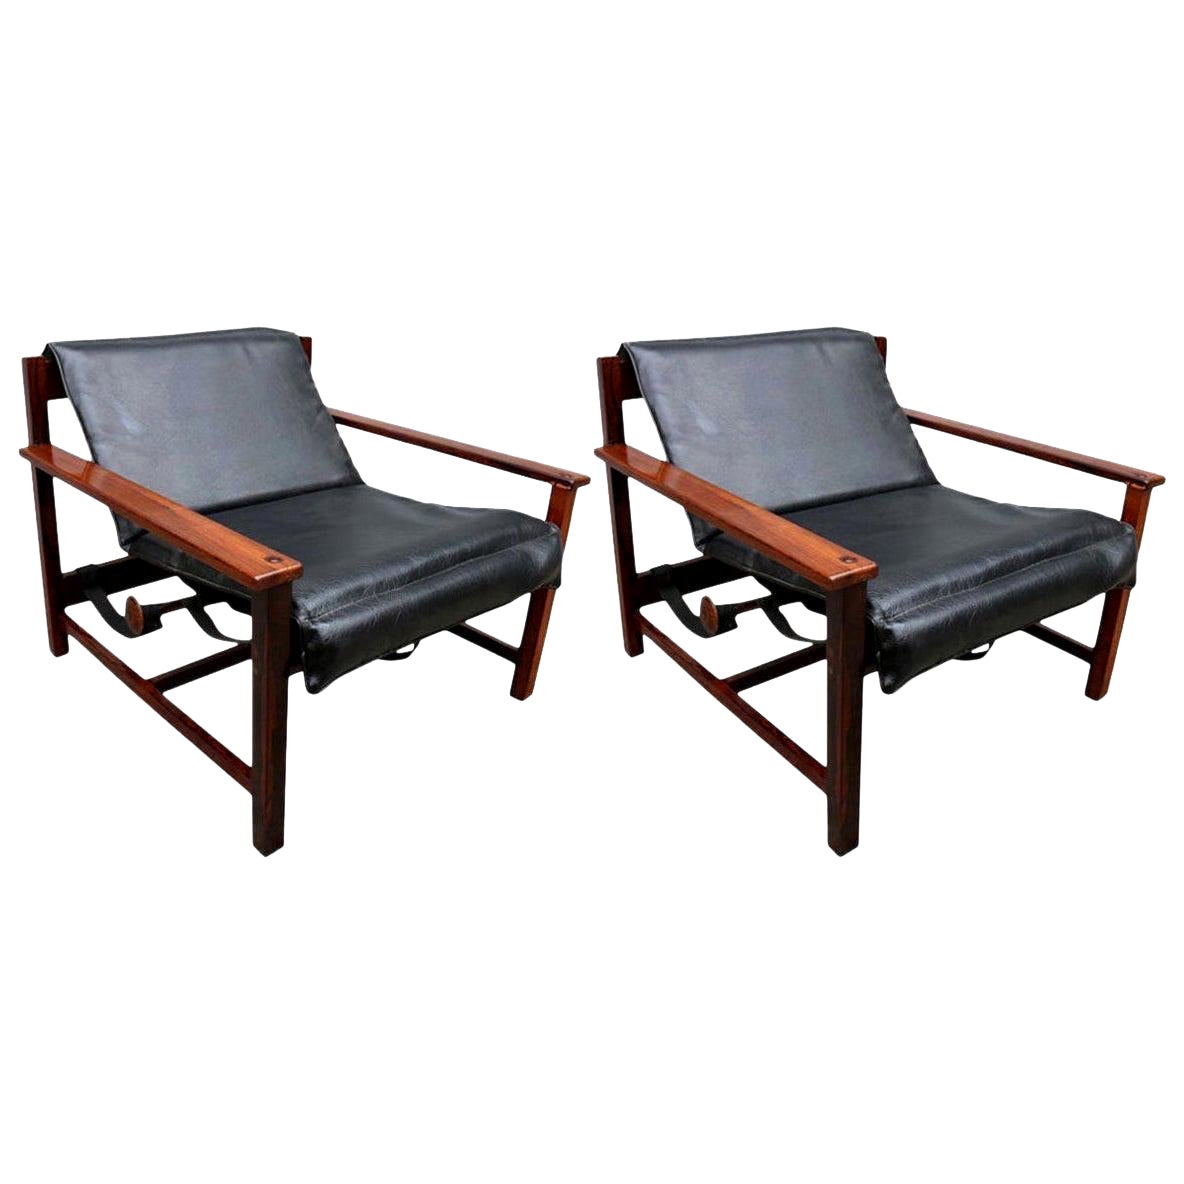 Pair of 1960s Brazilian Jacaranda Wood Reclining Lounge Chairs in Black Leather For Sale